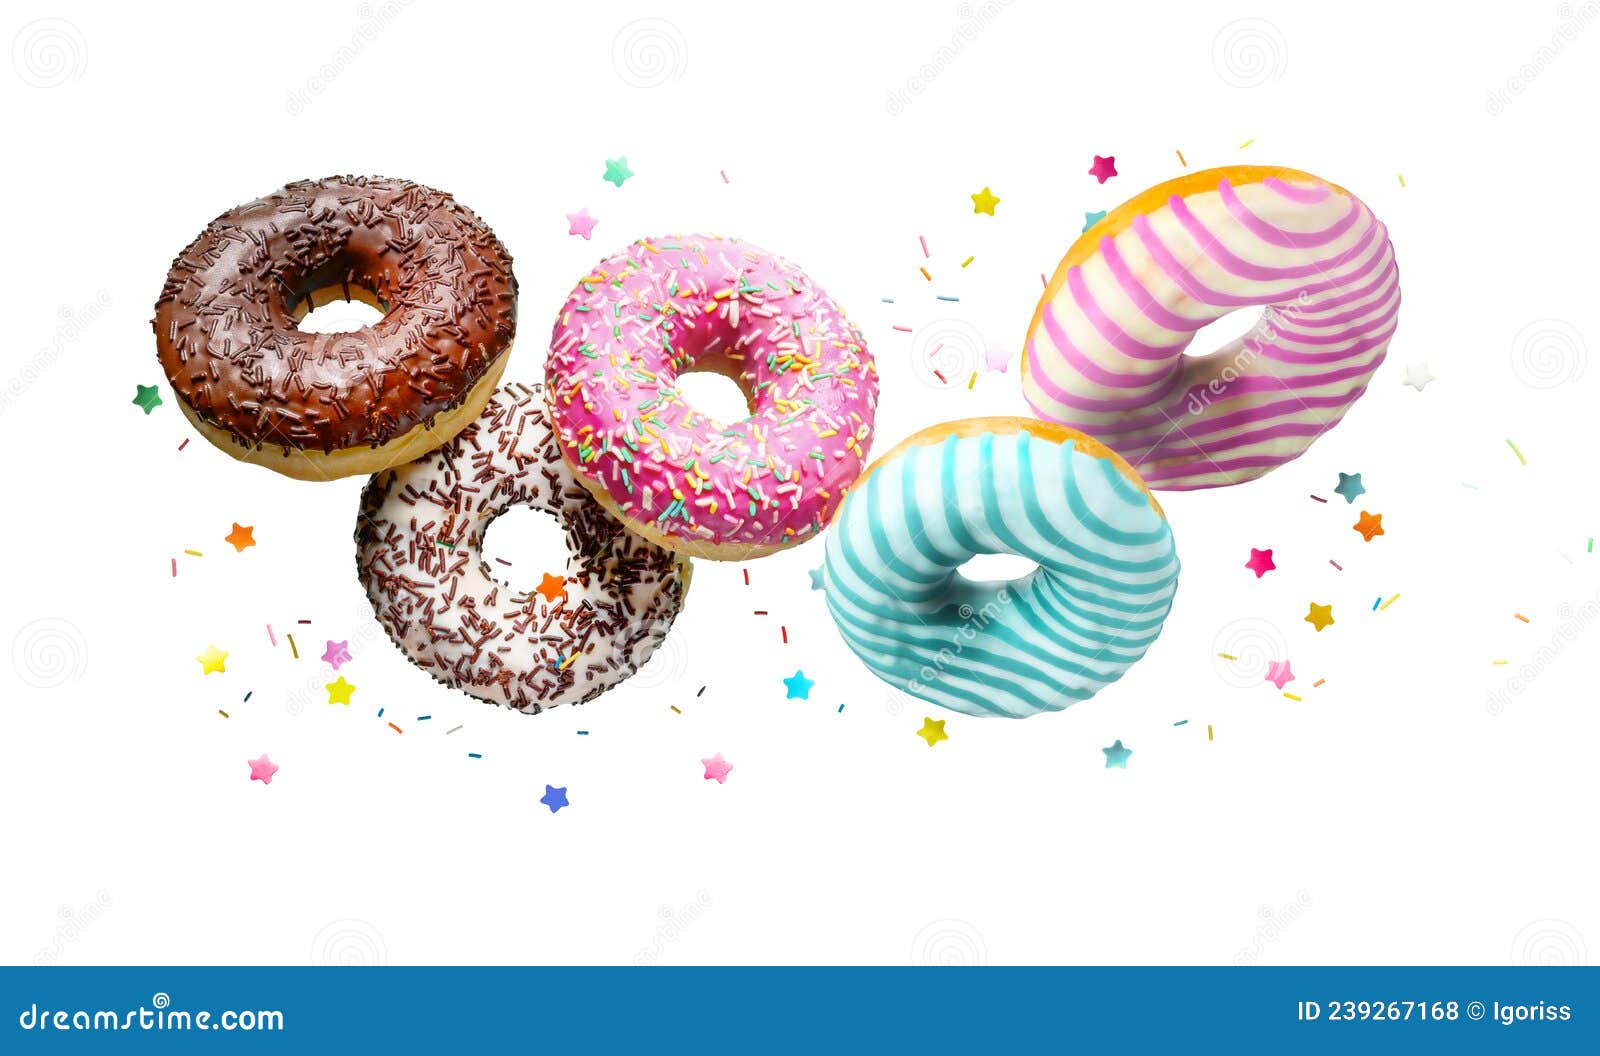 Donut With Sprinkles Isolated Stock Photo - Download Image Now